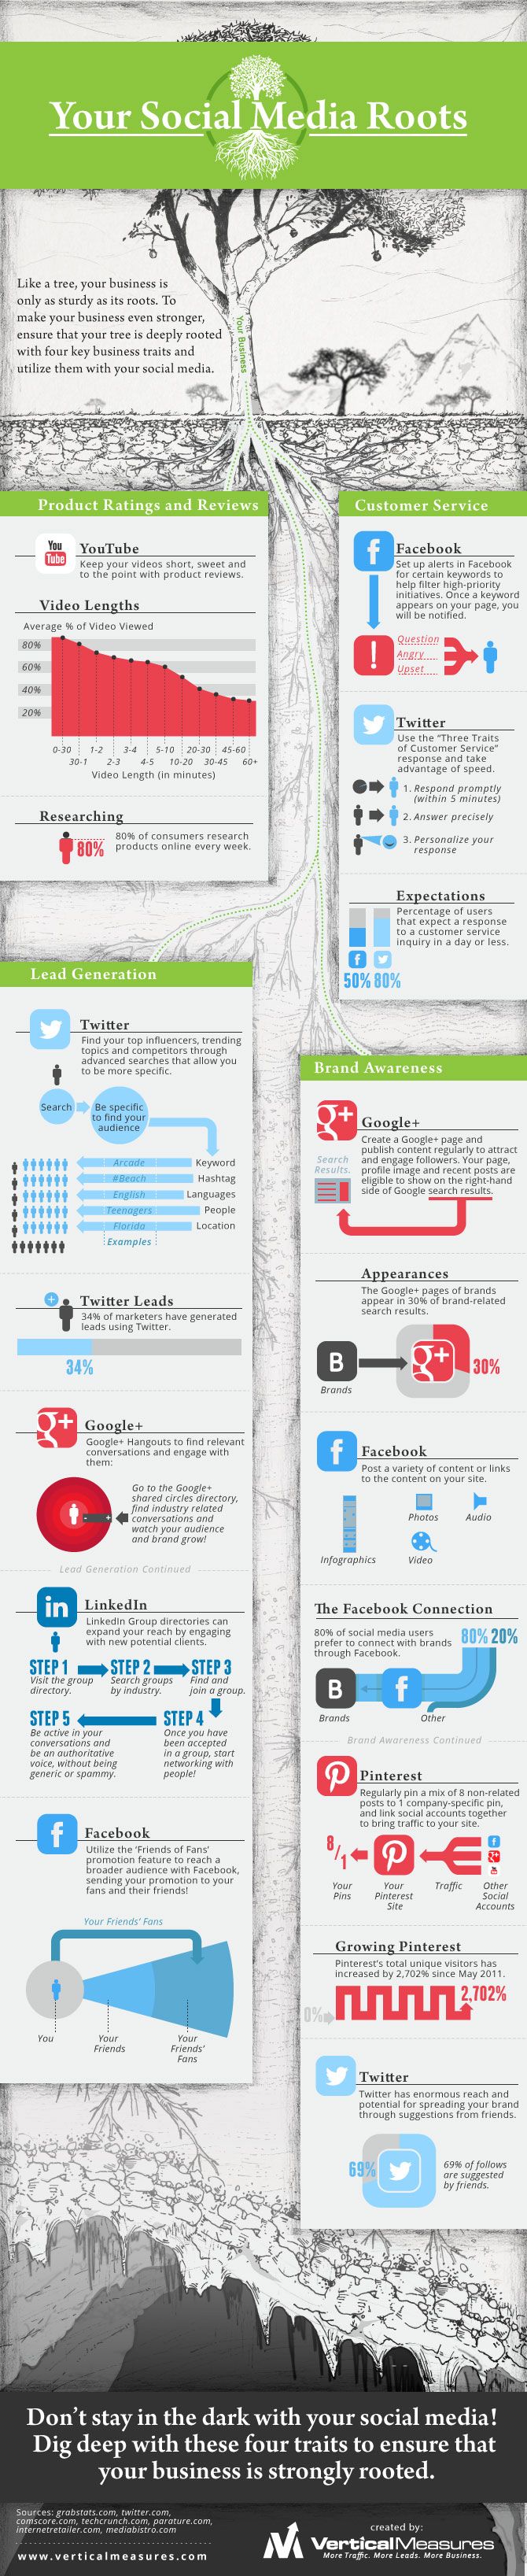 Your Social Media Roots